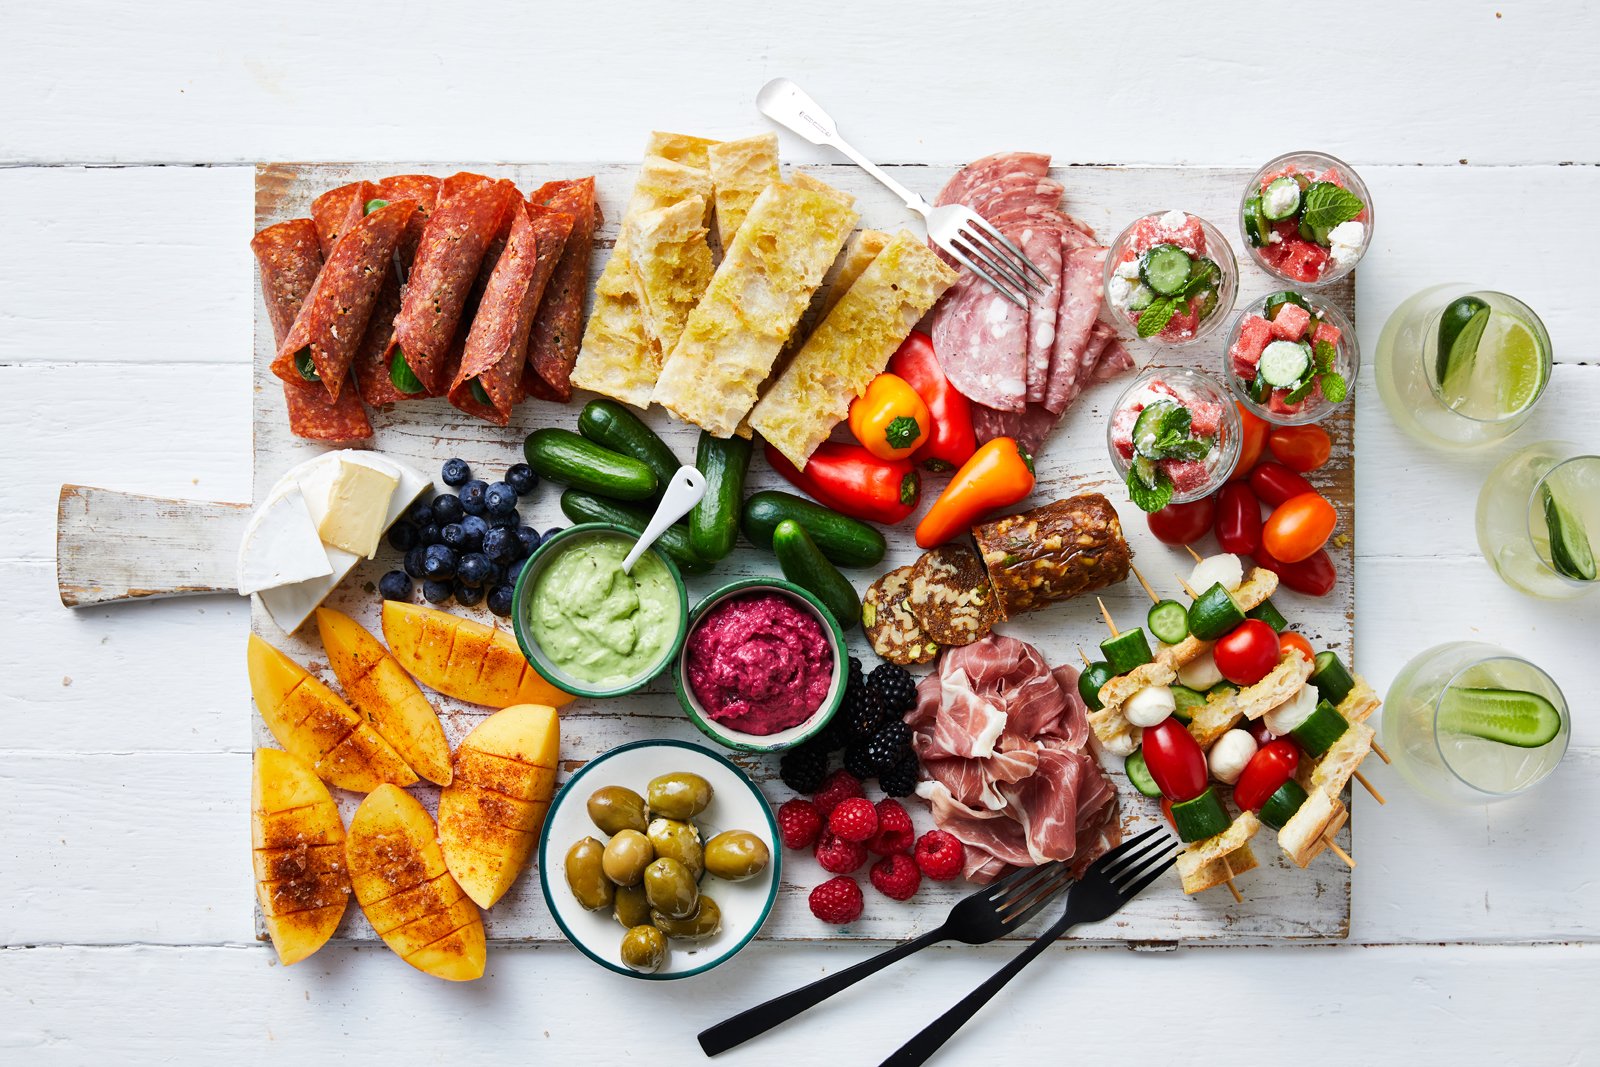 Grazing platter with fruits, vegetables, olives, mangoes and dips.